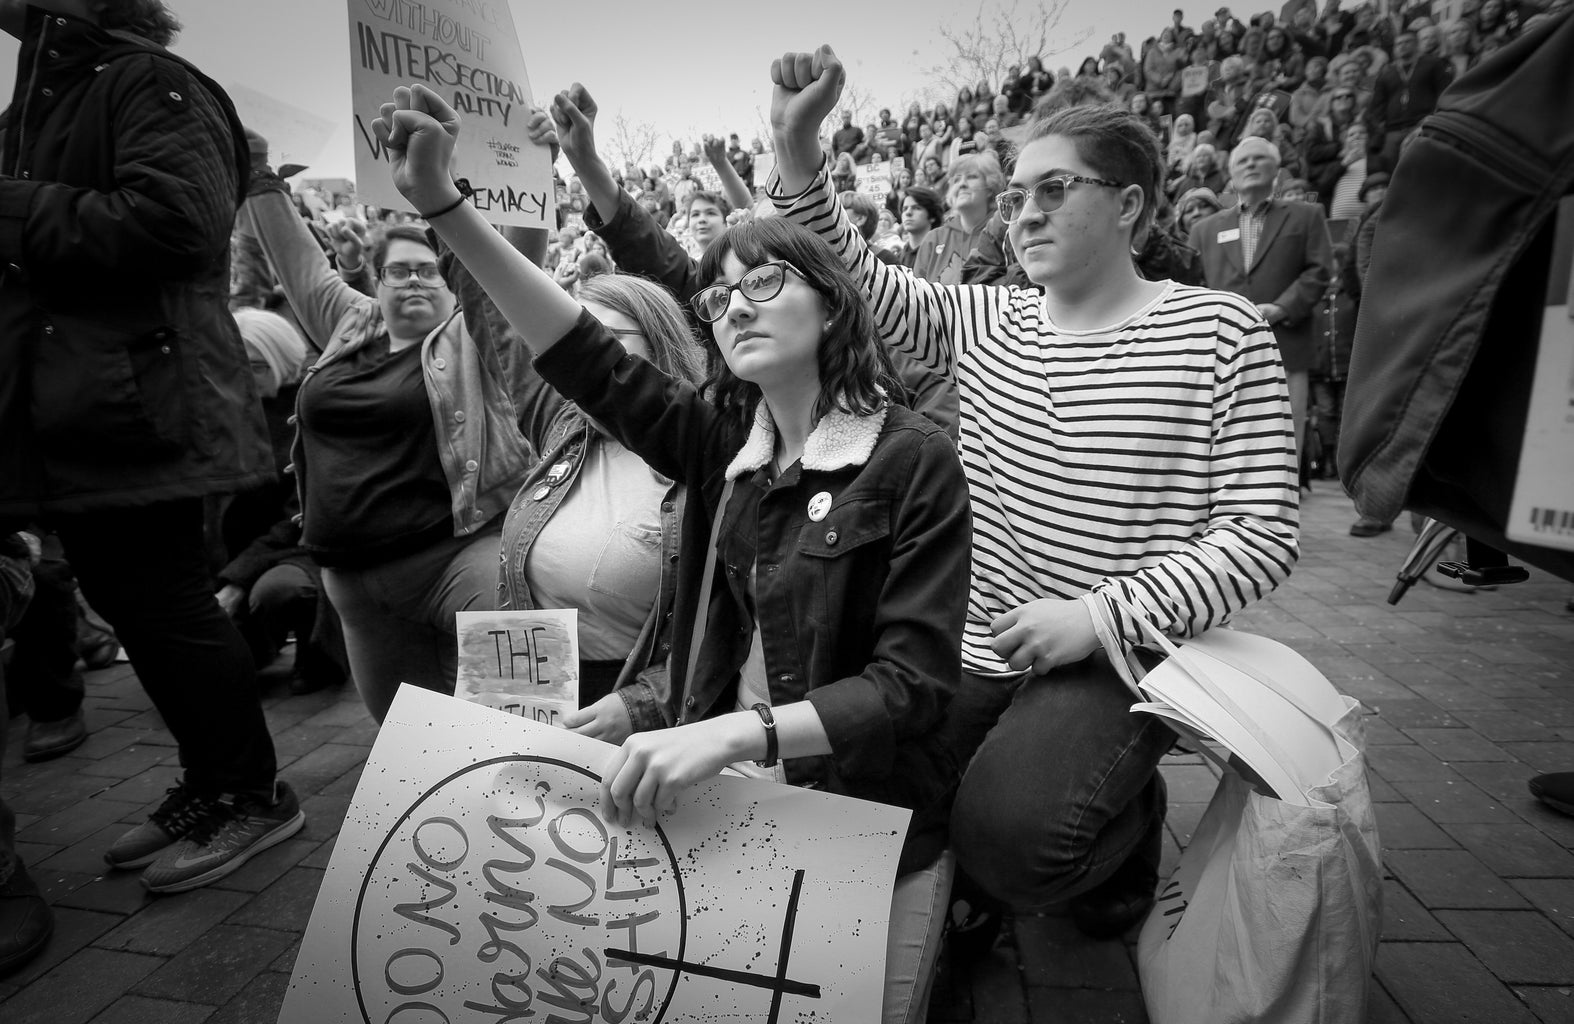 two women protesting on one knee with raised fists